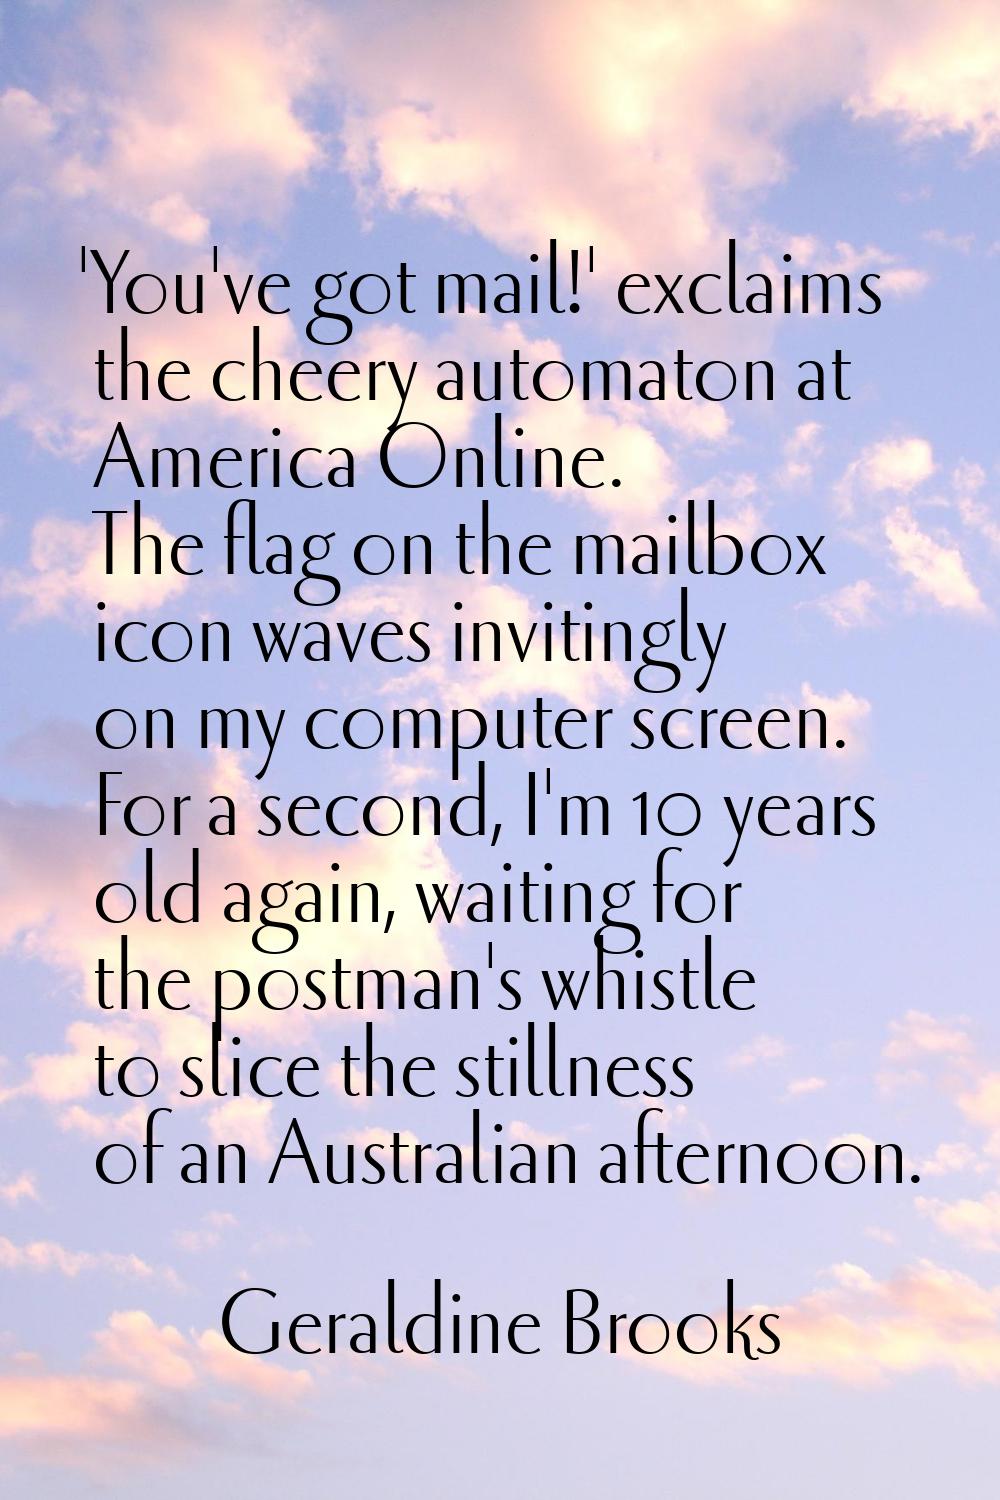 'You've got mail!' exclaims the cheery automaton at America Online. The flag on the mailbox icon wa